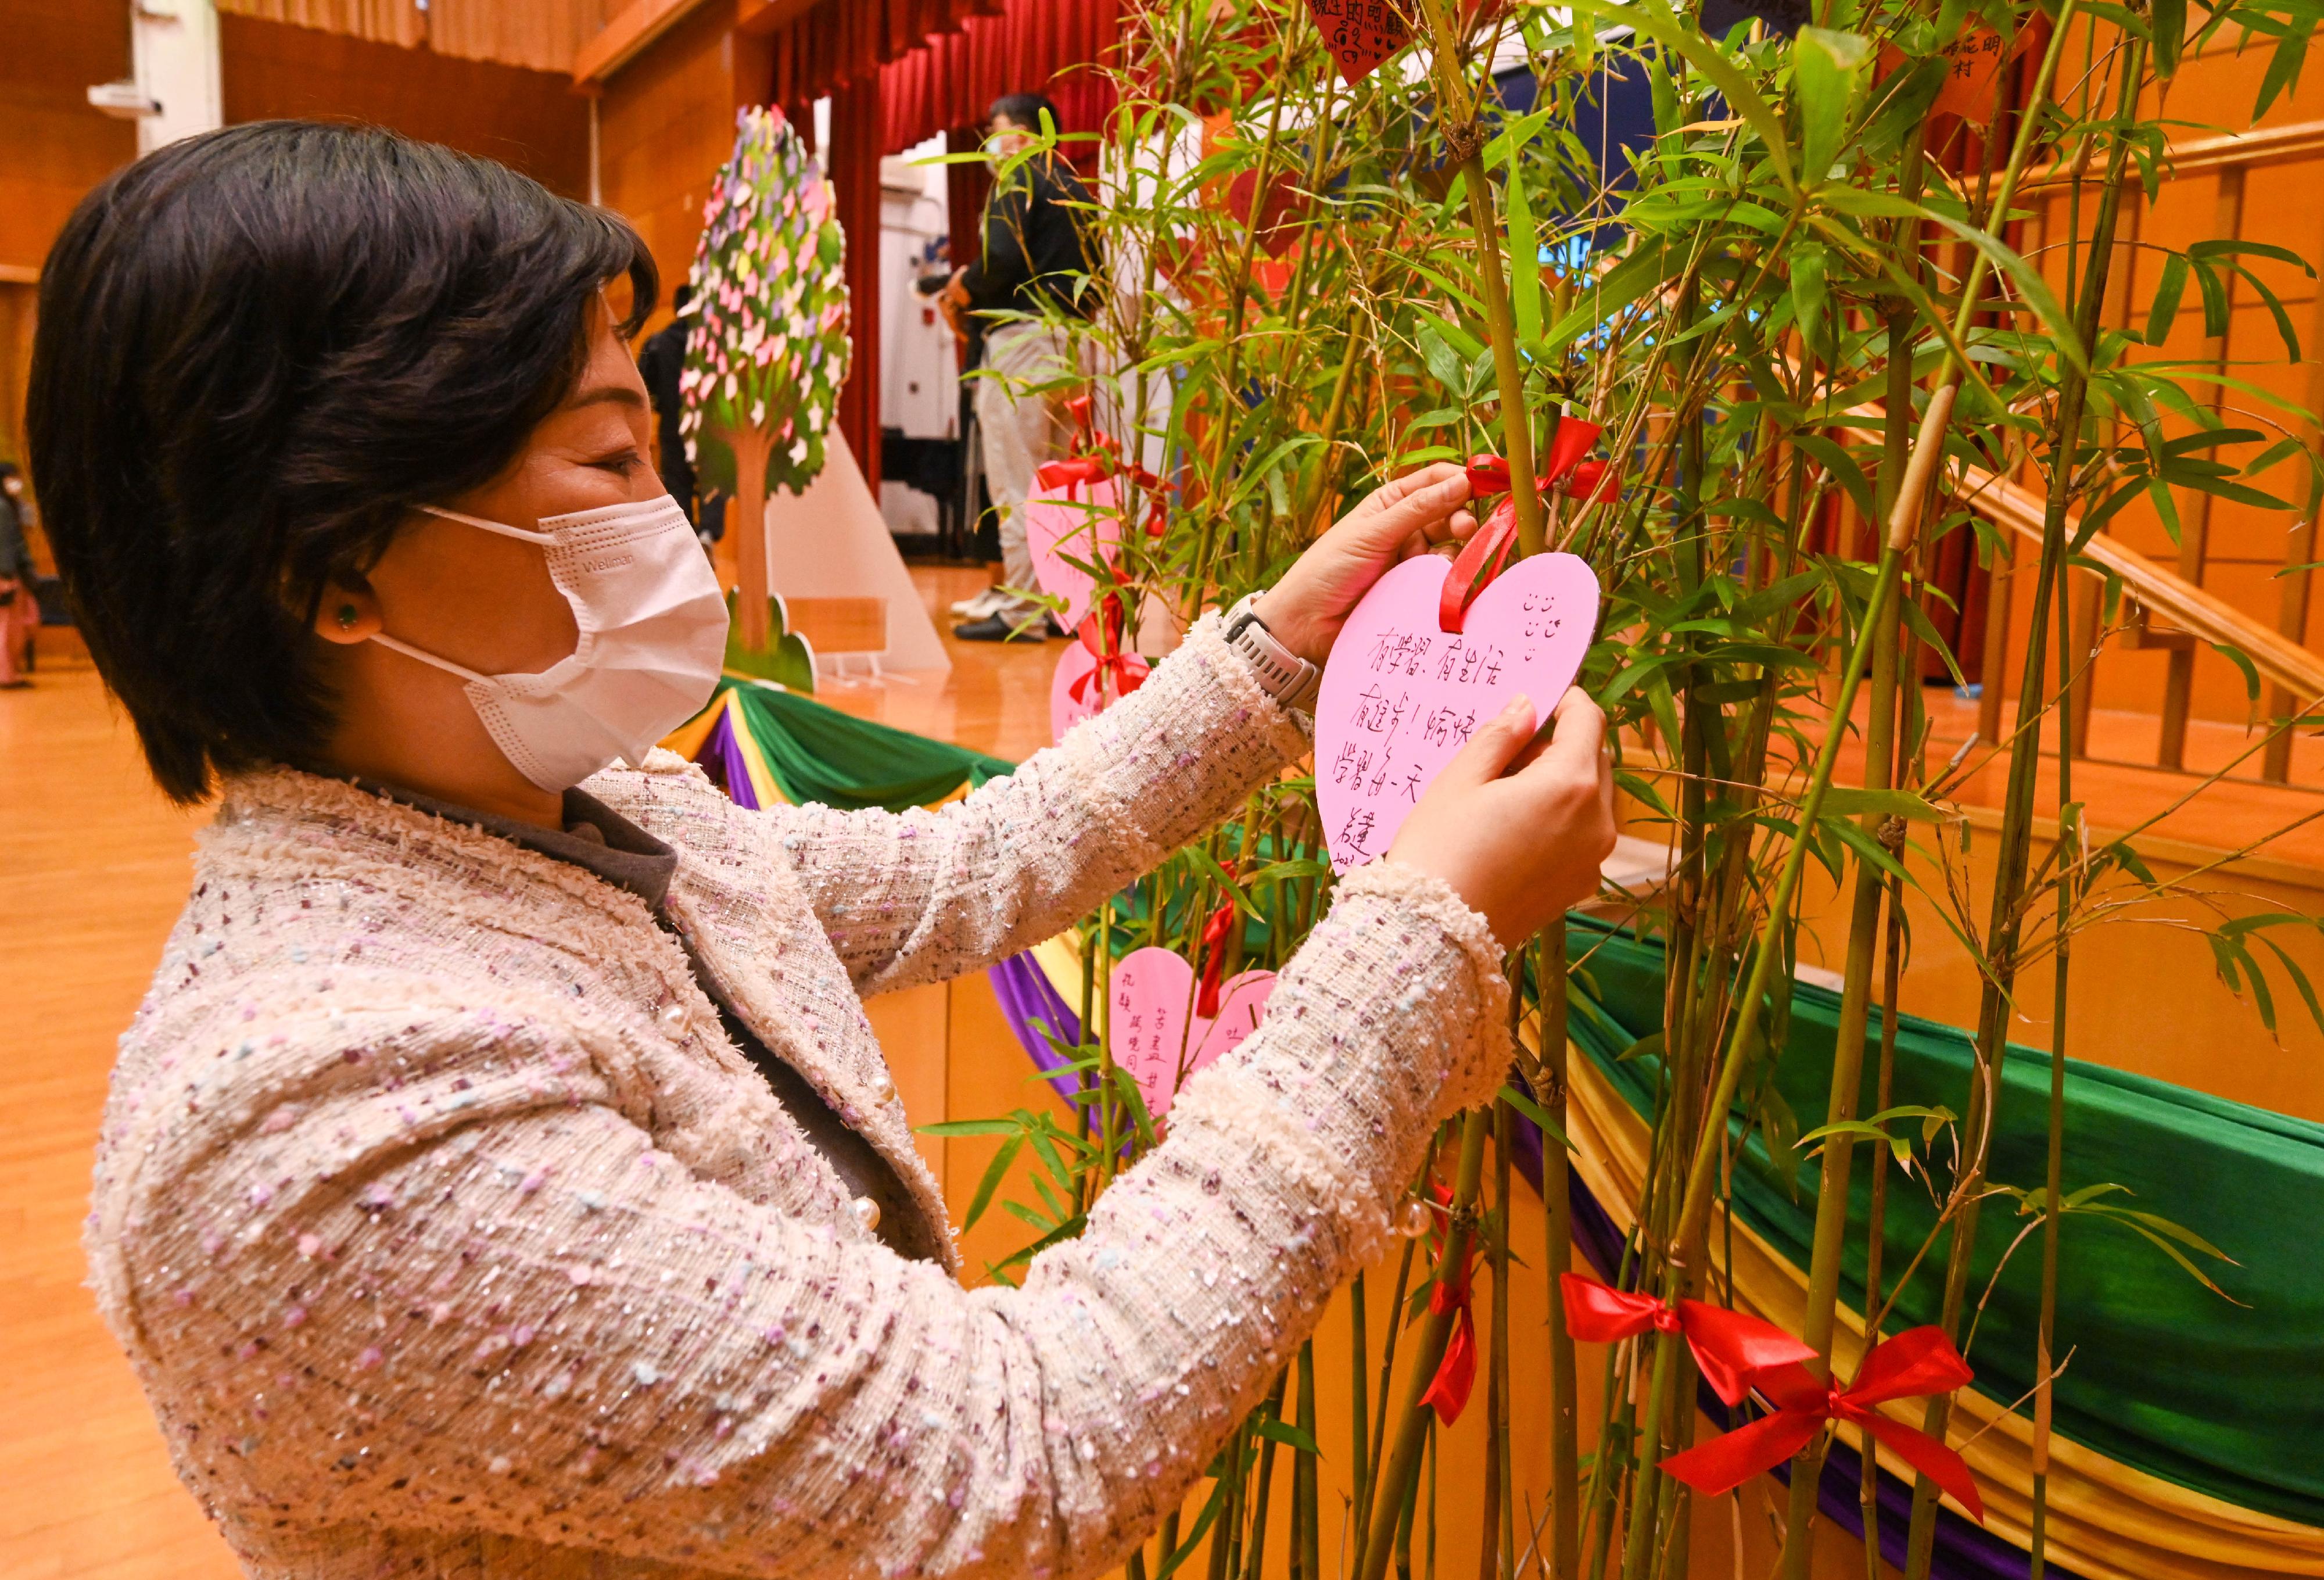 The Secretary for Education, Dr Choi Yuk-lin, visited the Shun Tak Fraternal Association Yung Yau College in Tin Shui Wai this morning (February 8) to learn about the arrangements of class resumption for cross-boundary students. Photo shows Dr Choi hanging a message card on a wishing tree to convey greetings and blessings to the students.
